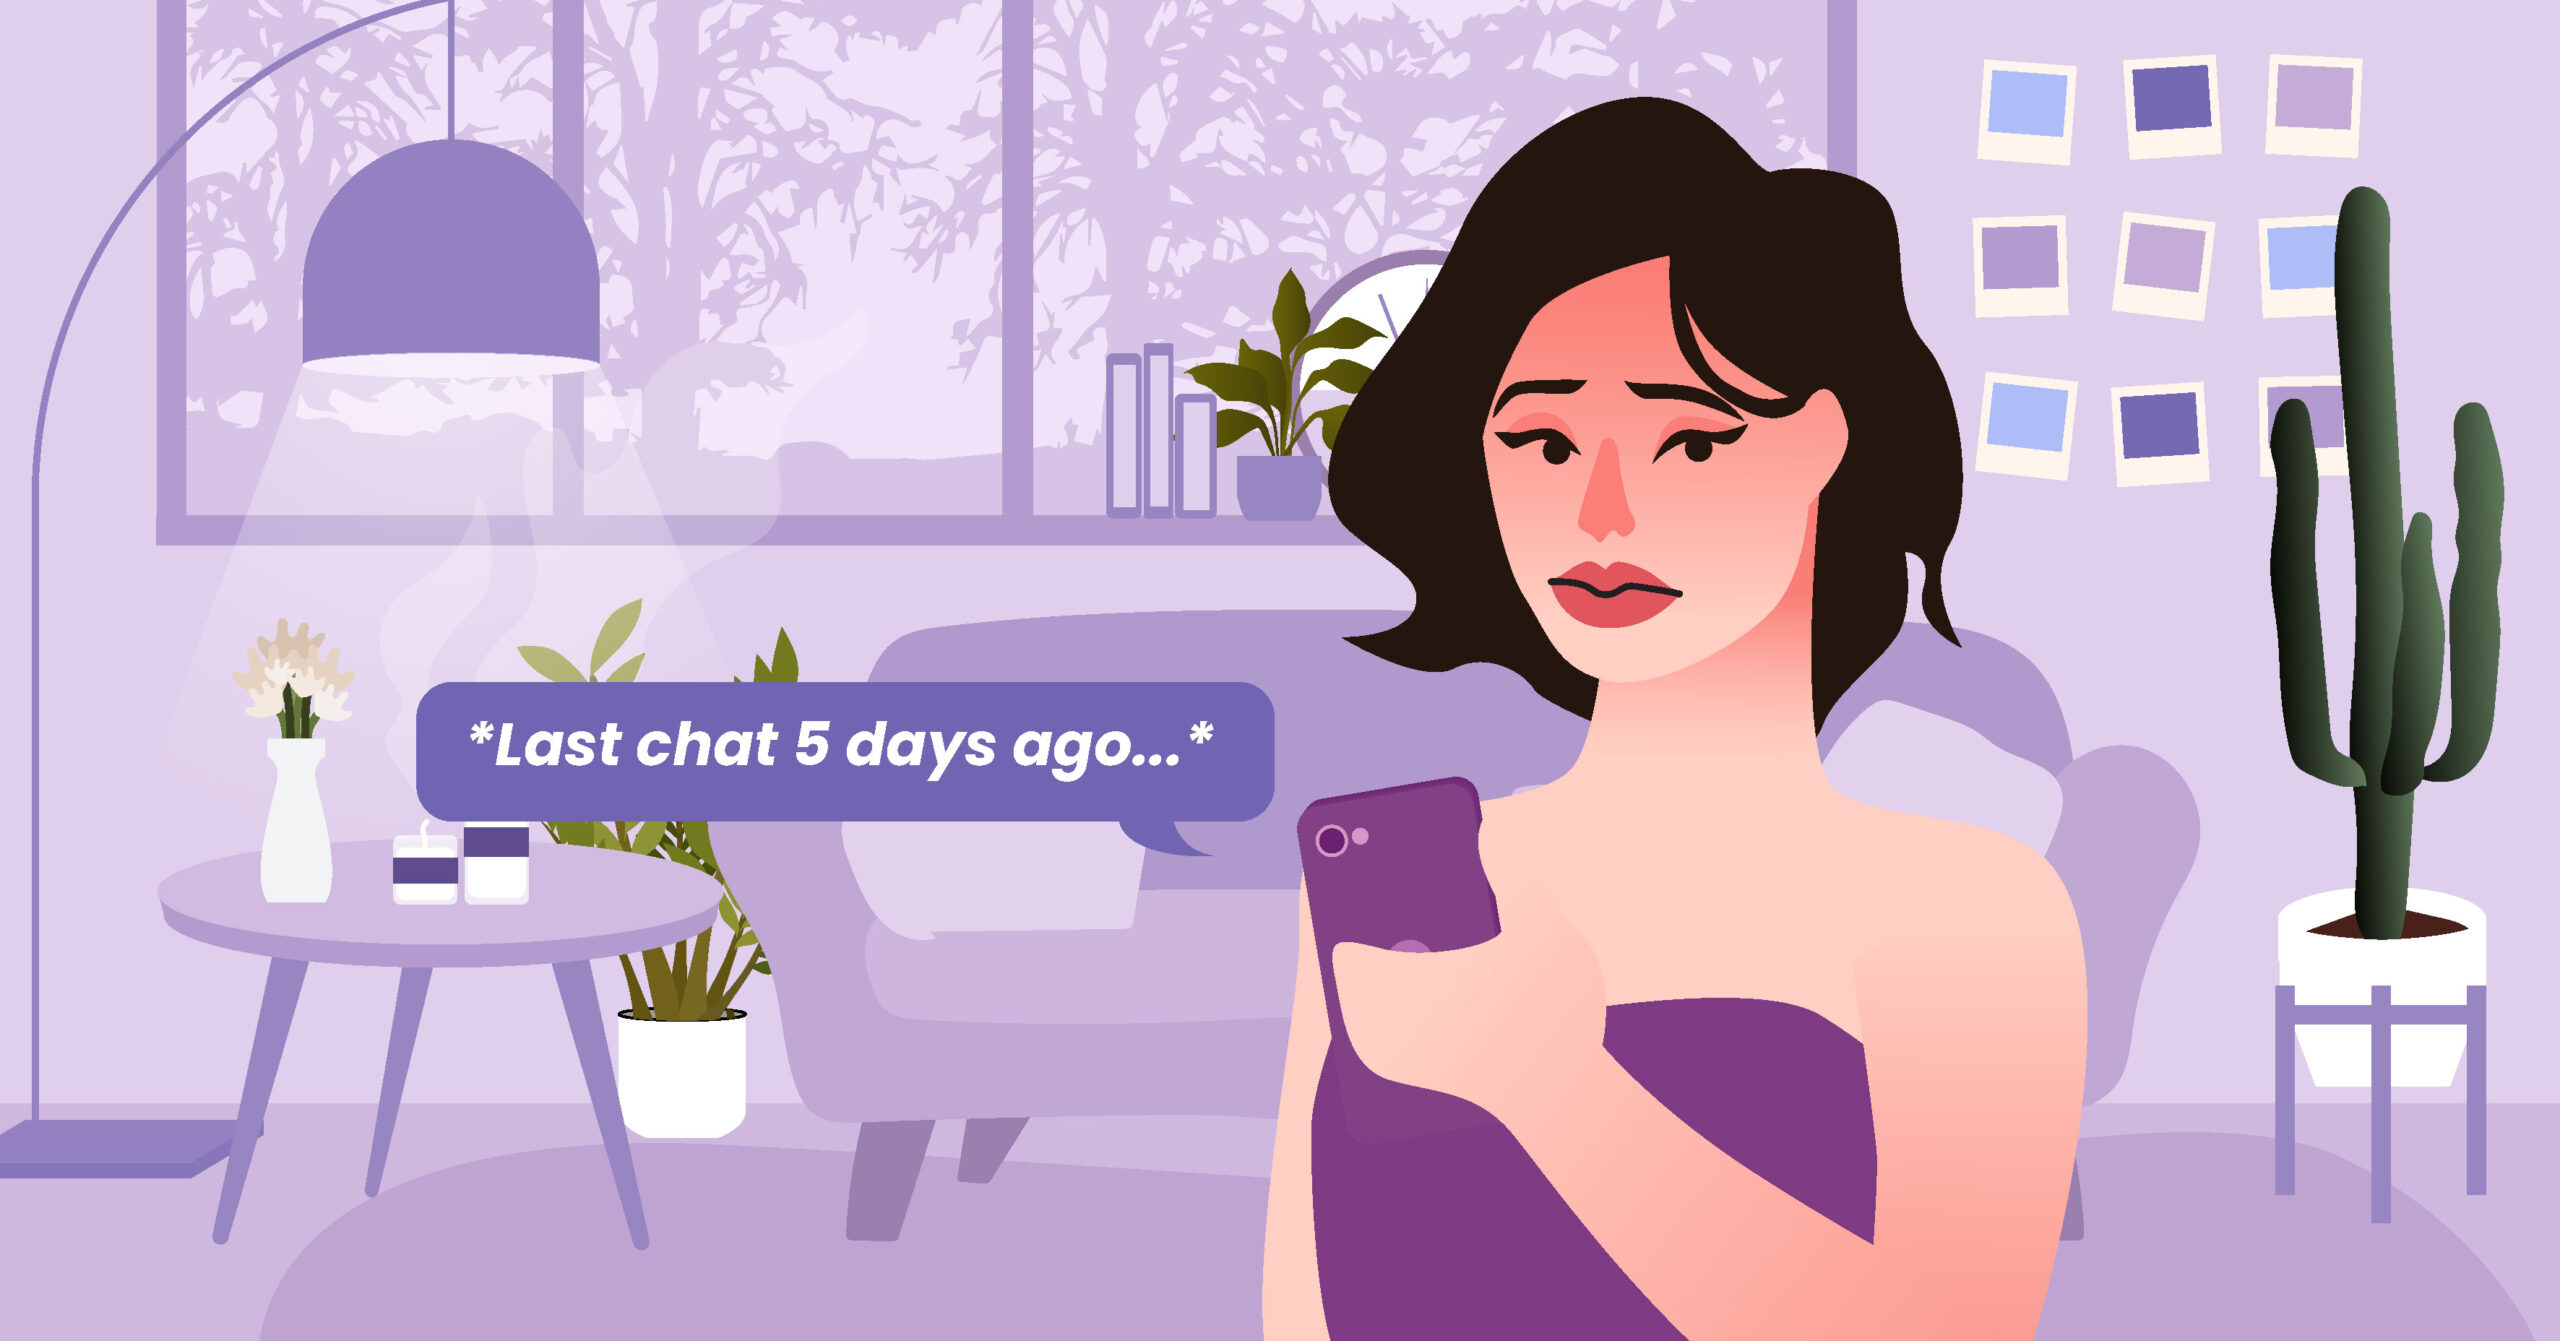 Got "Flatlined" in Dating Apps? Do This If Convo Gets Boring